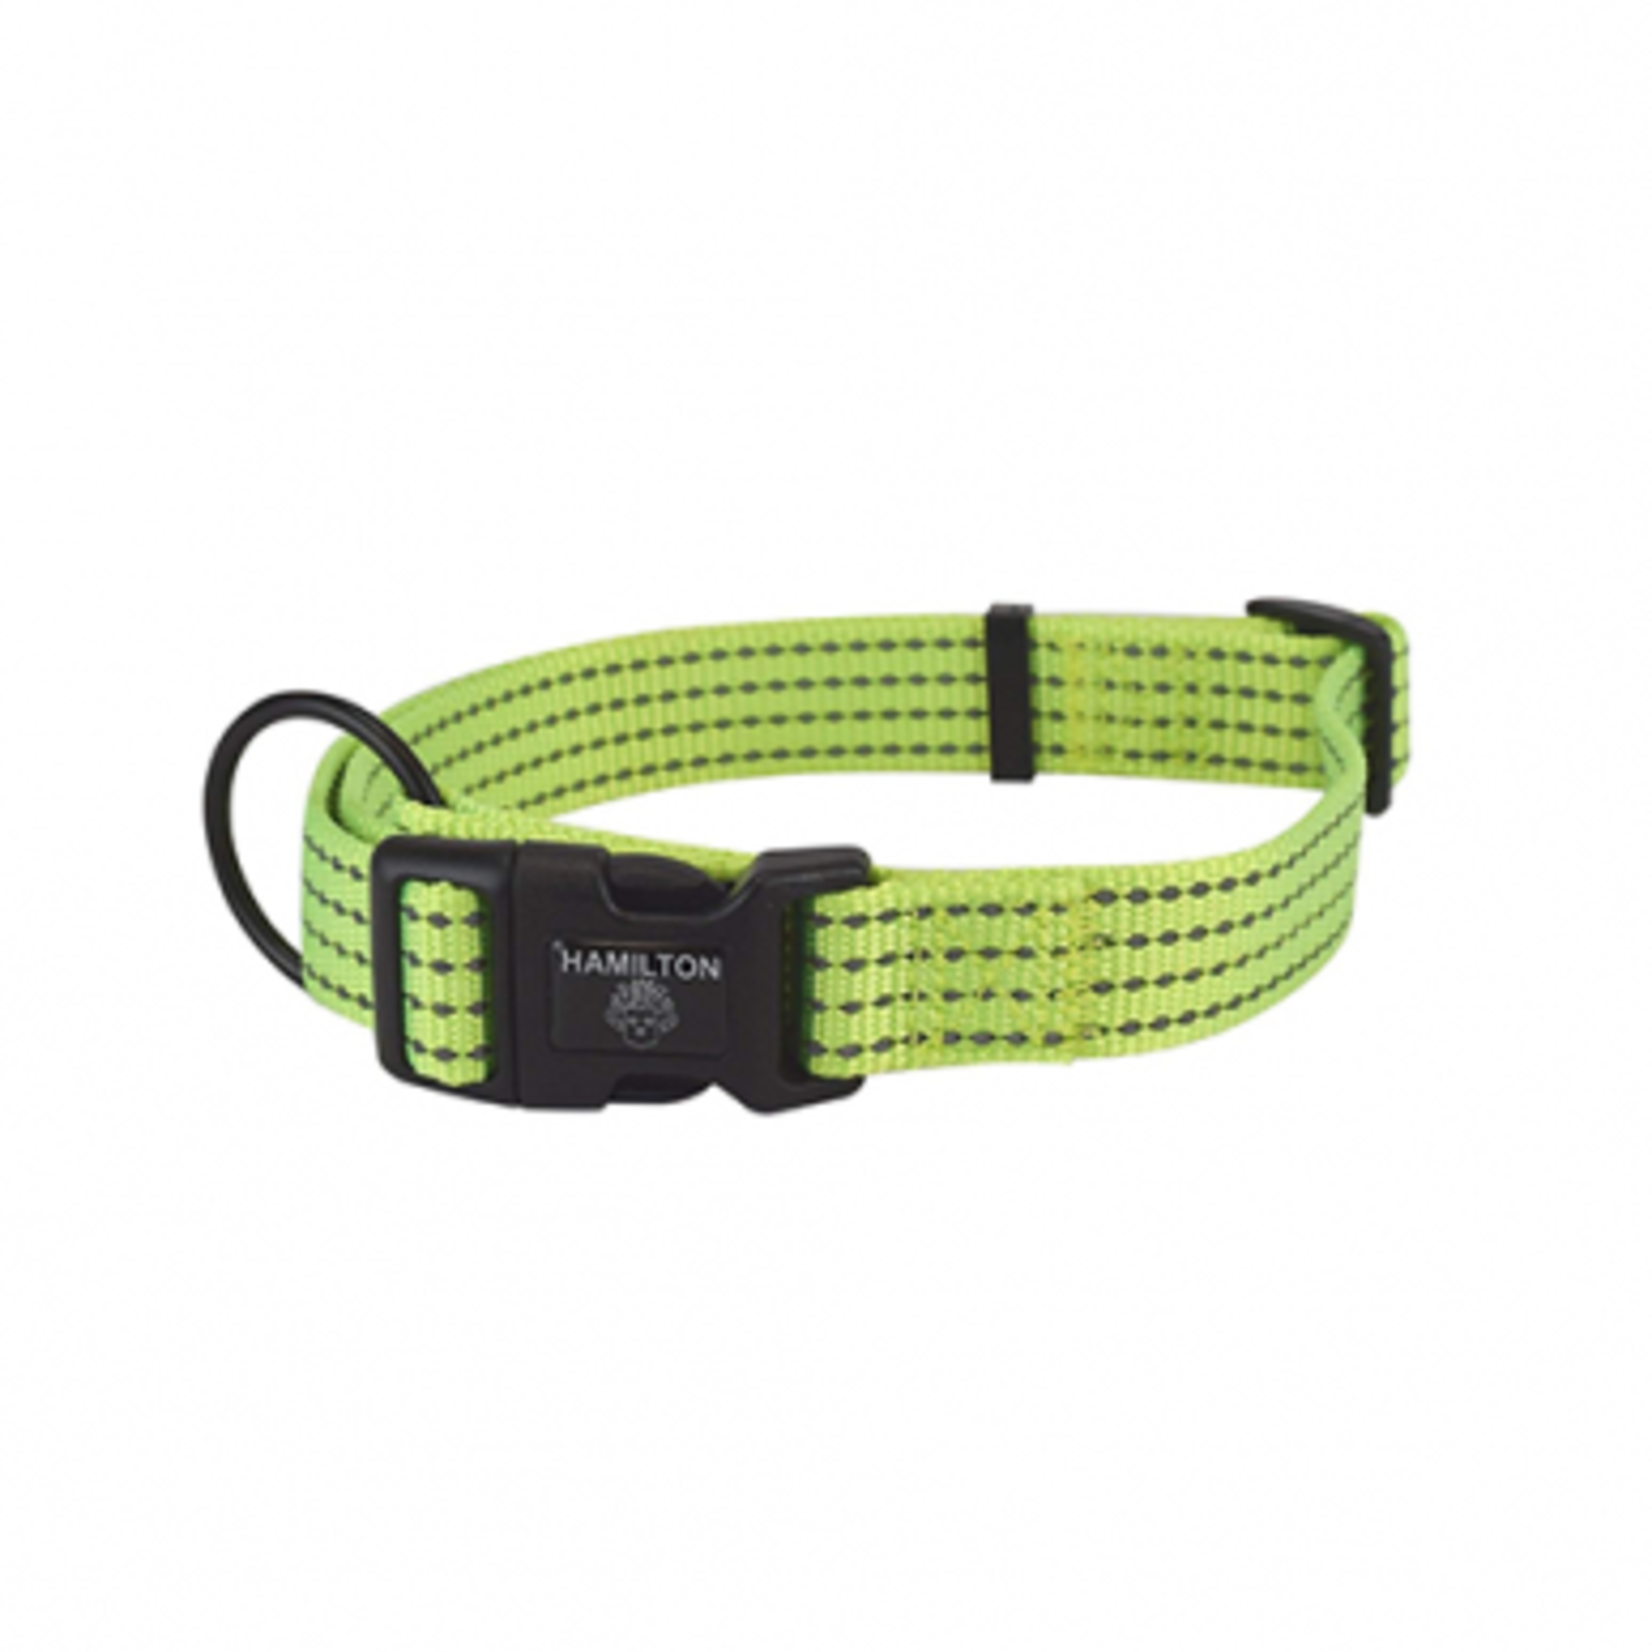 Hamilton High Visibility Adjustable Collar - Neon - 1 in X 18 to 26 in